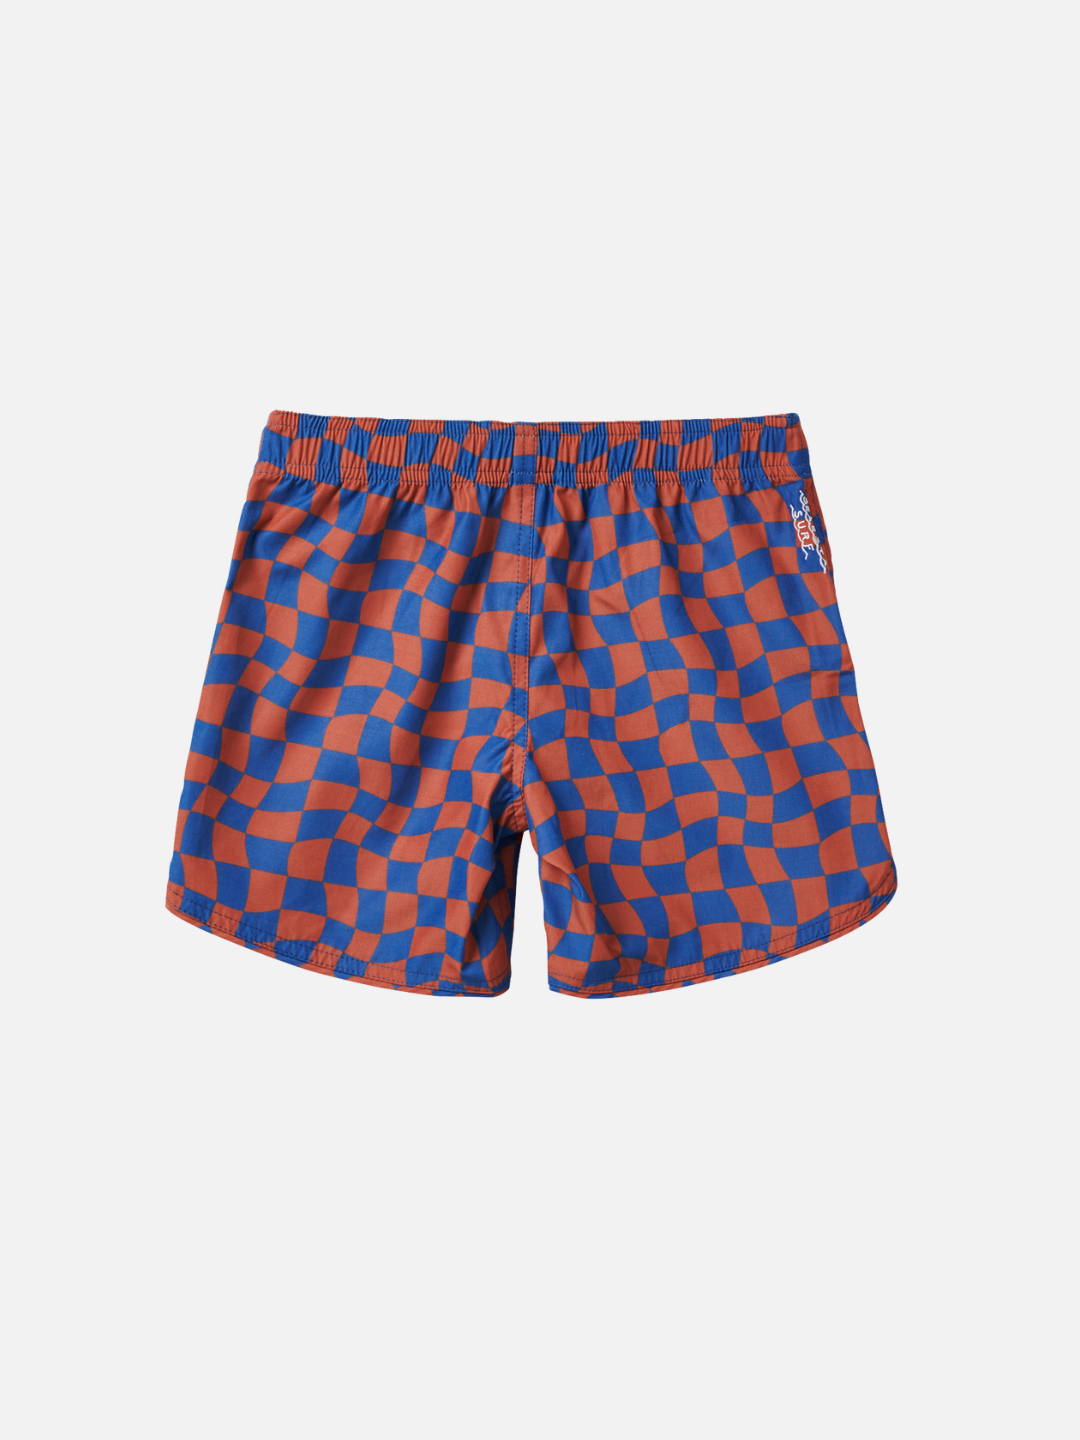 A back view of the kid's Wavy Checks Boardshort